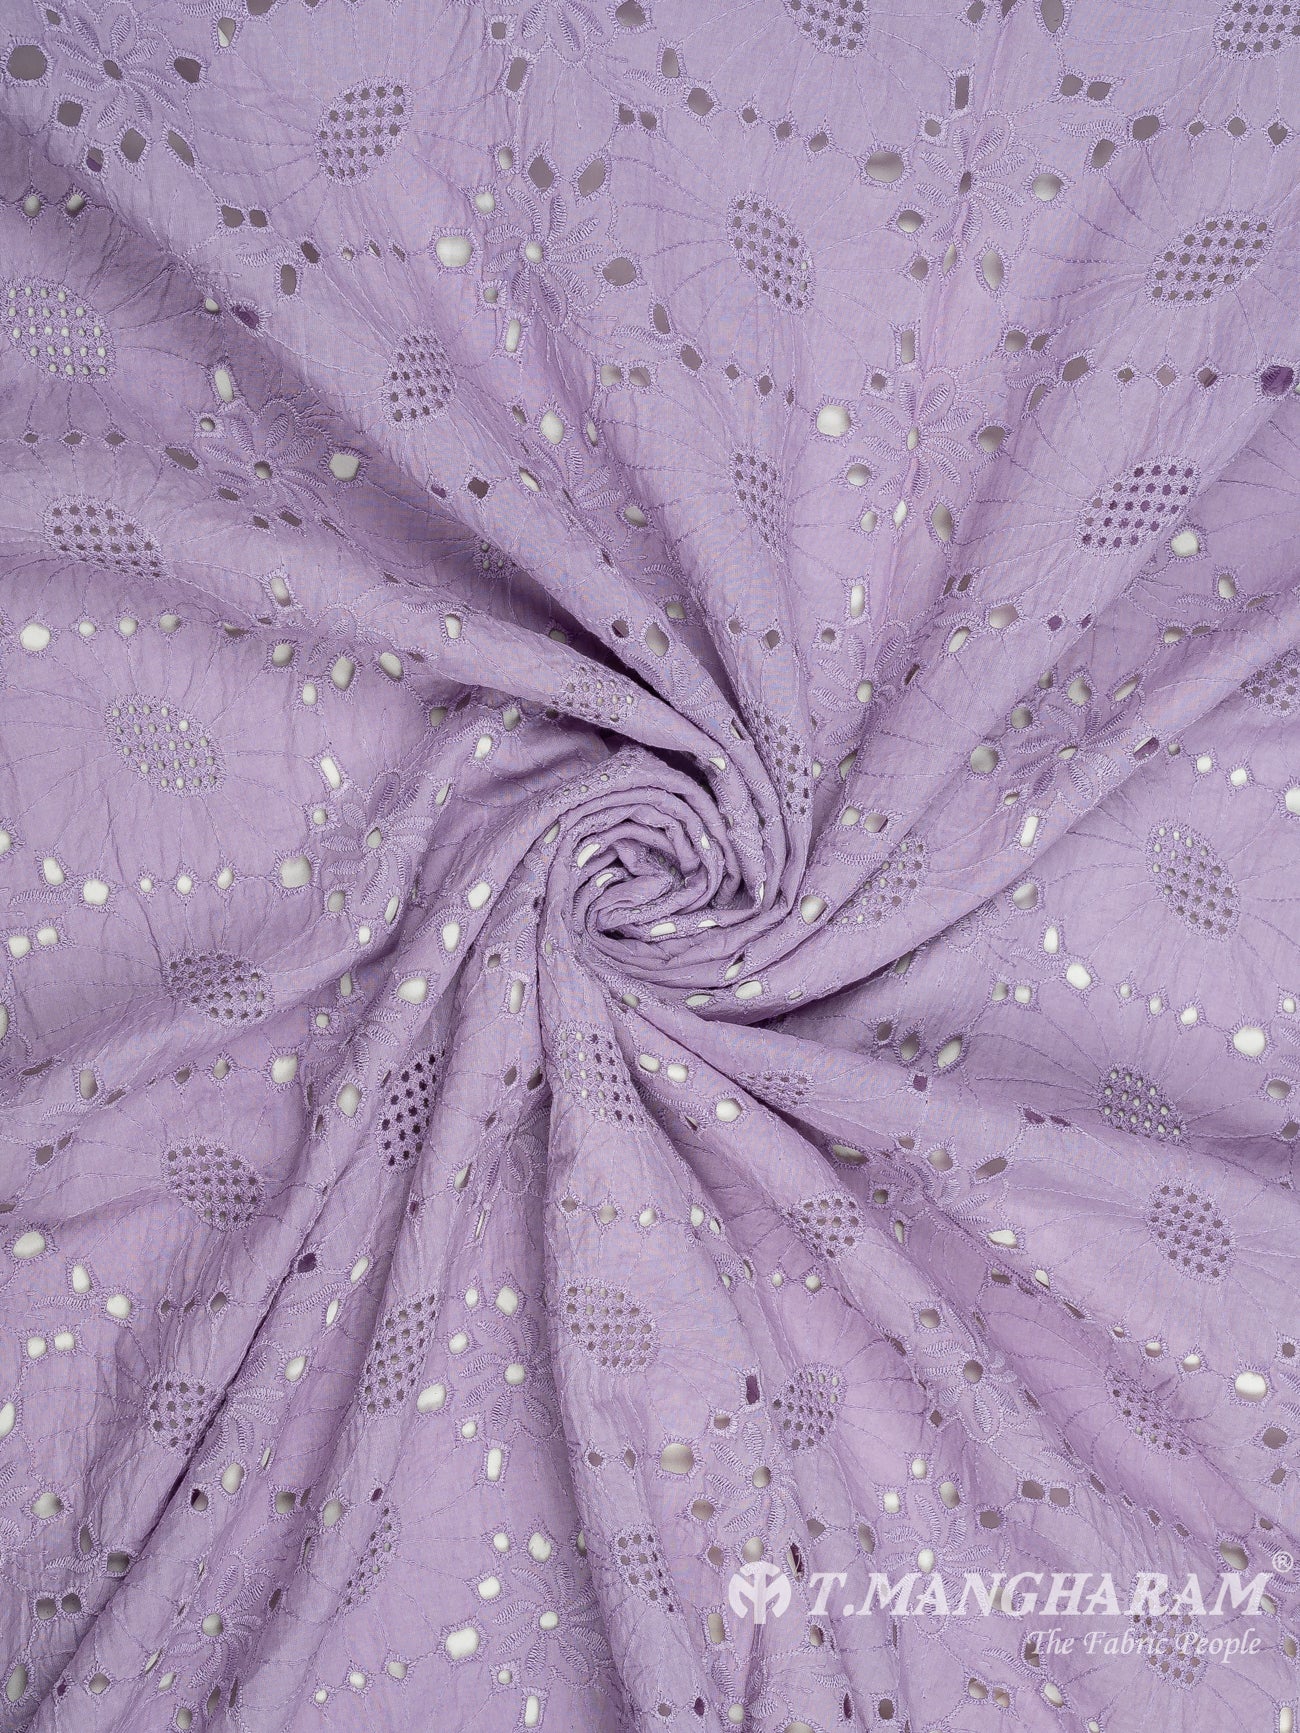 Violet Cotton Embroidery Fabric - EC8598 view-1